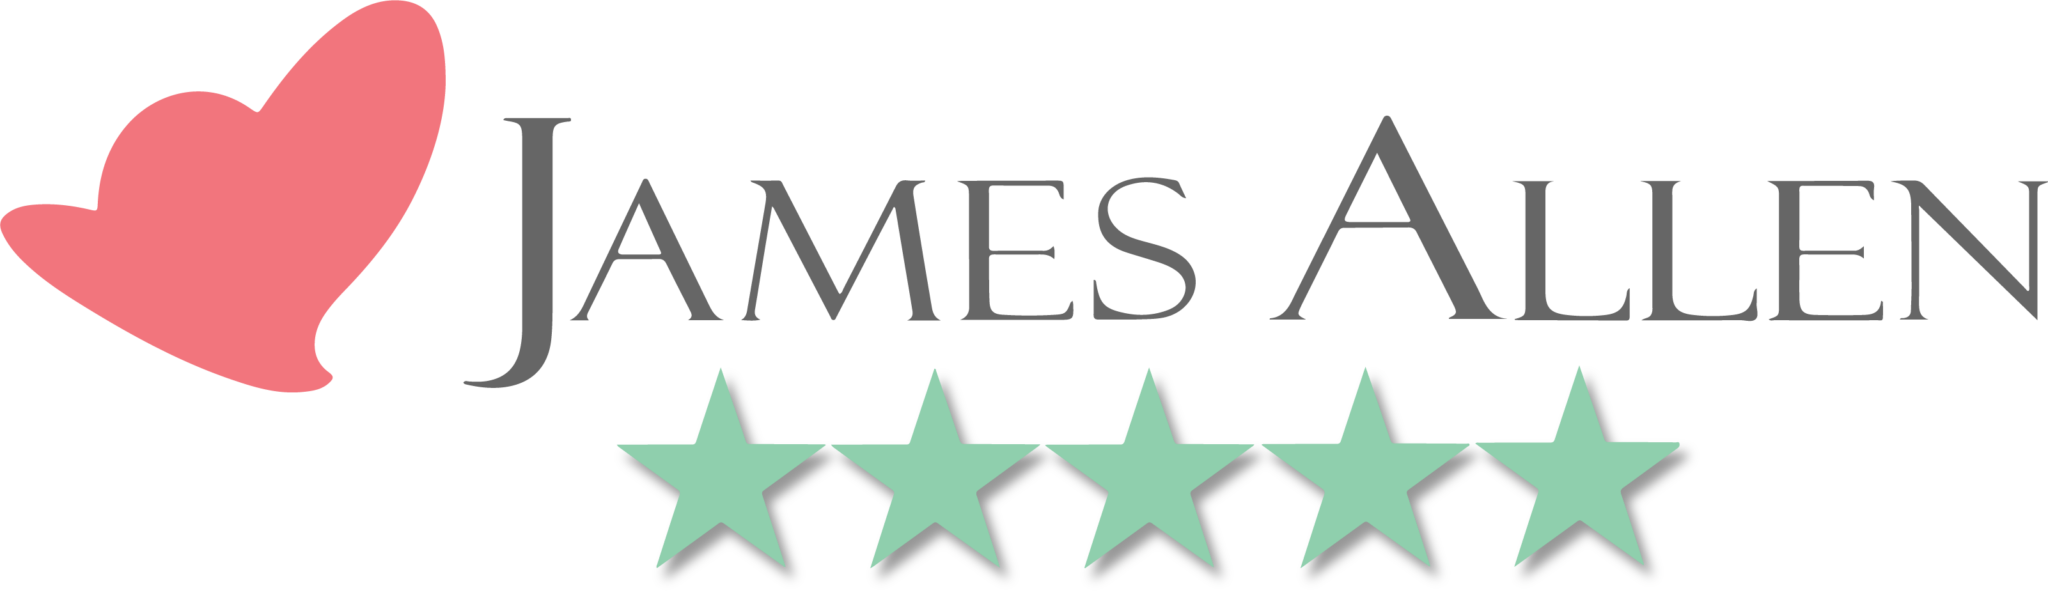 James Allen Review A Comprehensive and Honest Opinion